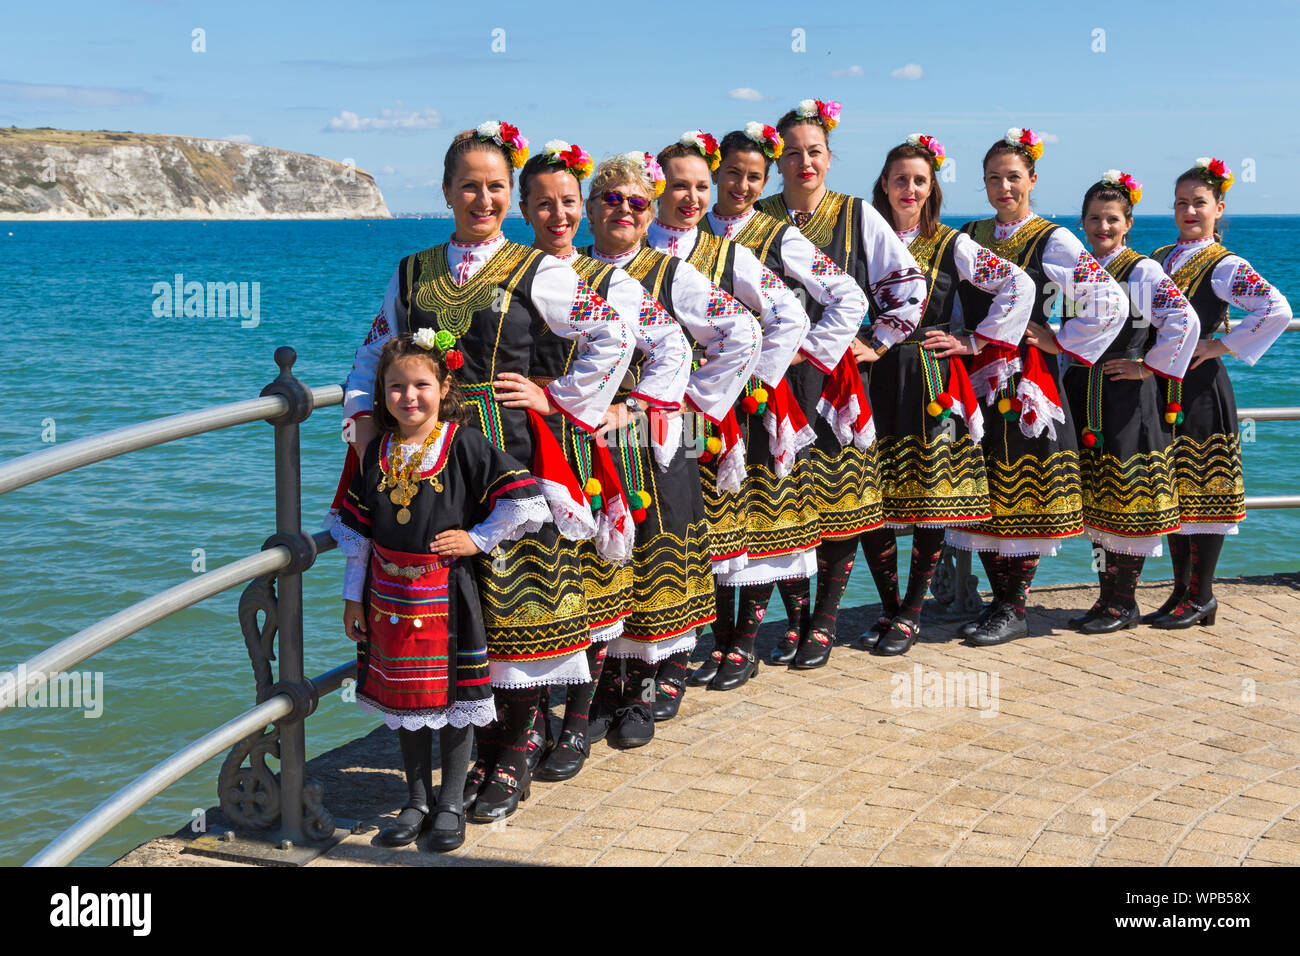 Swanage, Dorset UK. 8th September 2019. Crowds flock to the seaside town of Swanage to enjoy the dancing, with over 50 dance teams including morris dancing for Swanage Folk Festival on a warm sunny day. Zlaten Klas thrill the crowds with their traditional Bulgarian dances. Credit: Carolyn Jenkins/Alamy Live News Stock Photo